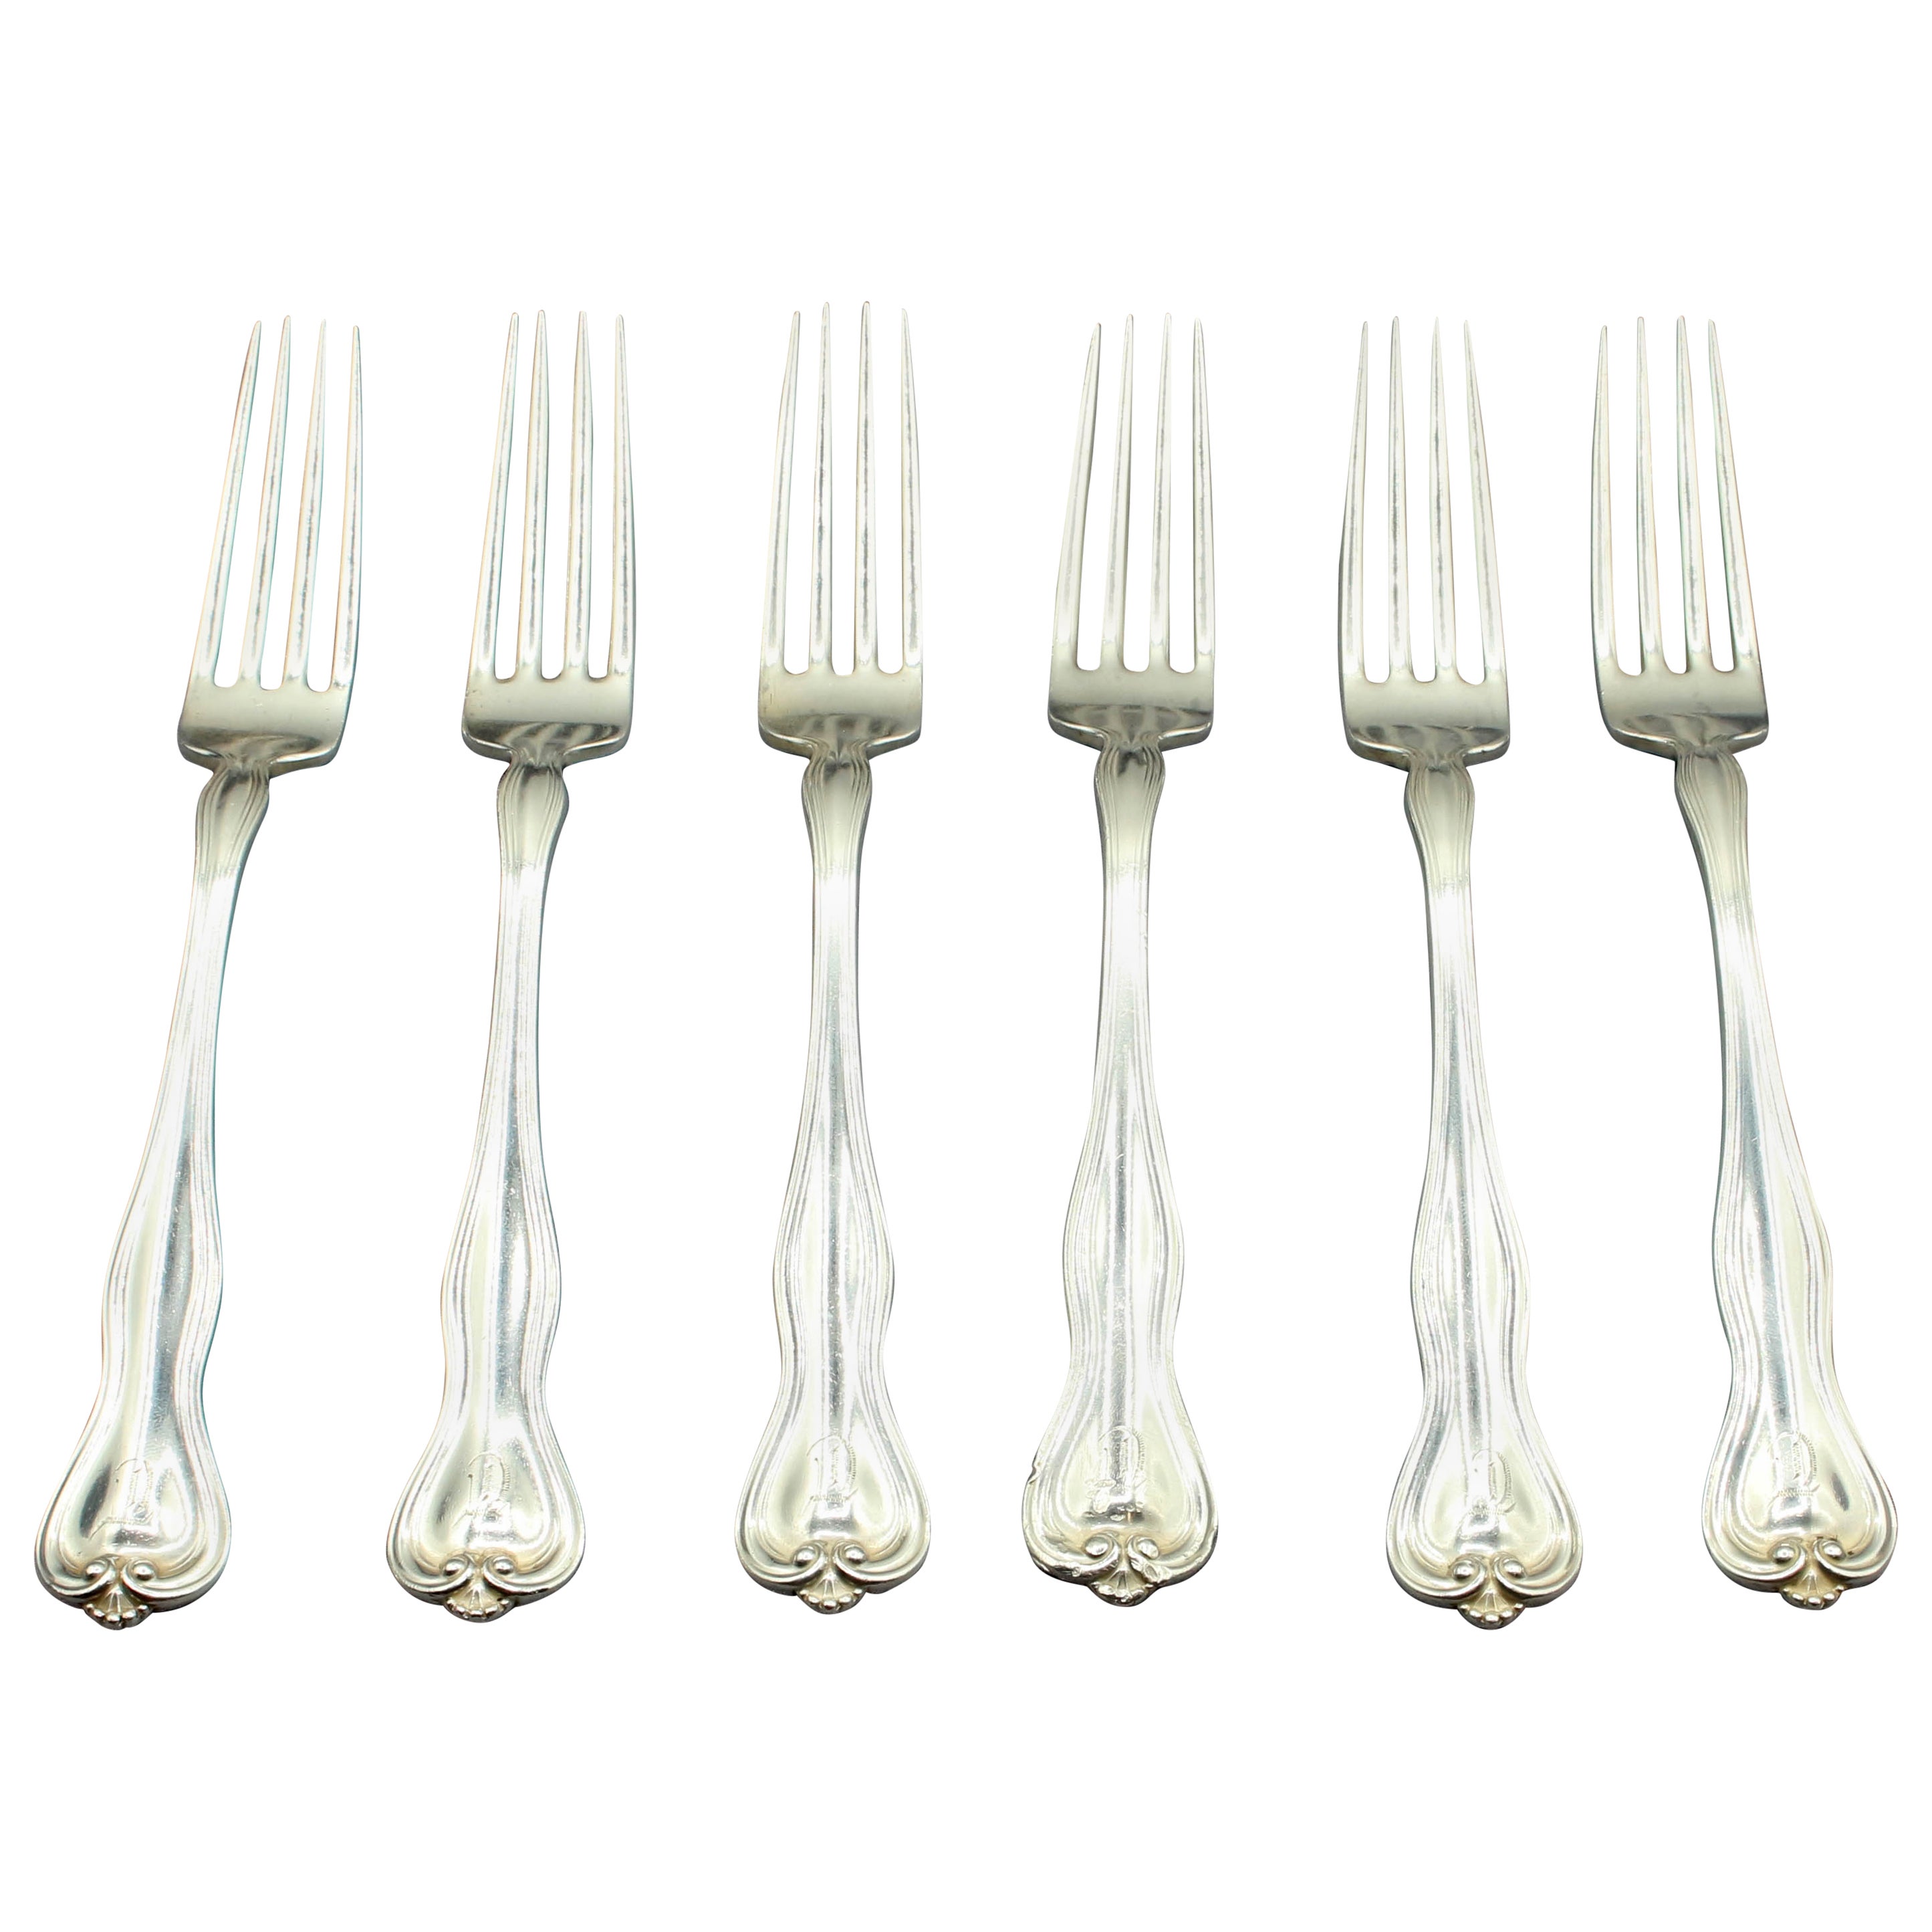 Set of 6 Sterling Silver Forks by Watson For Sale